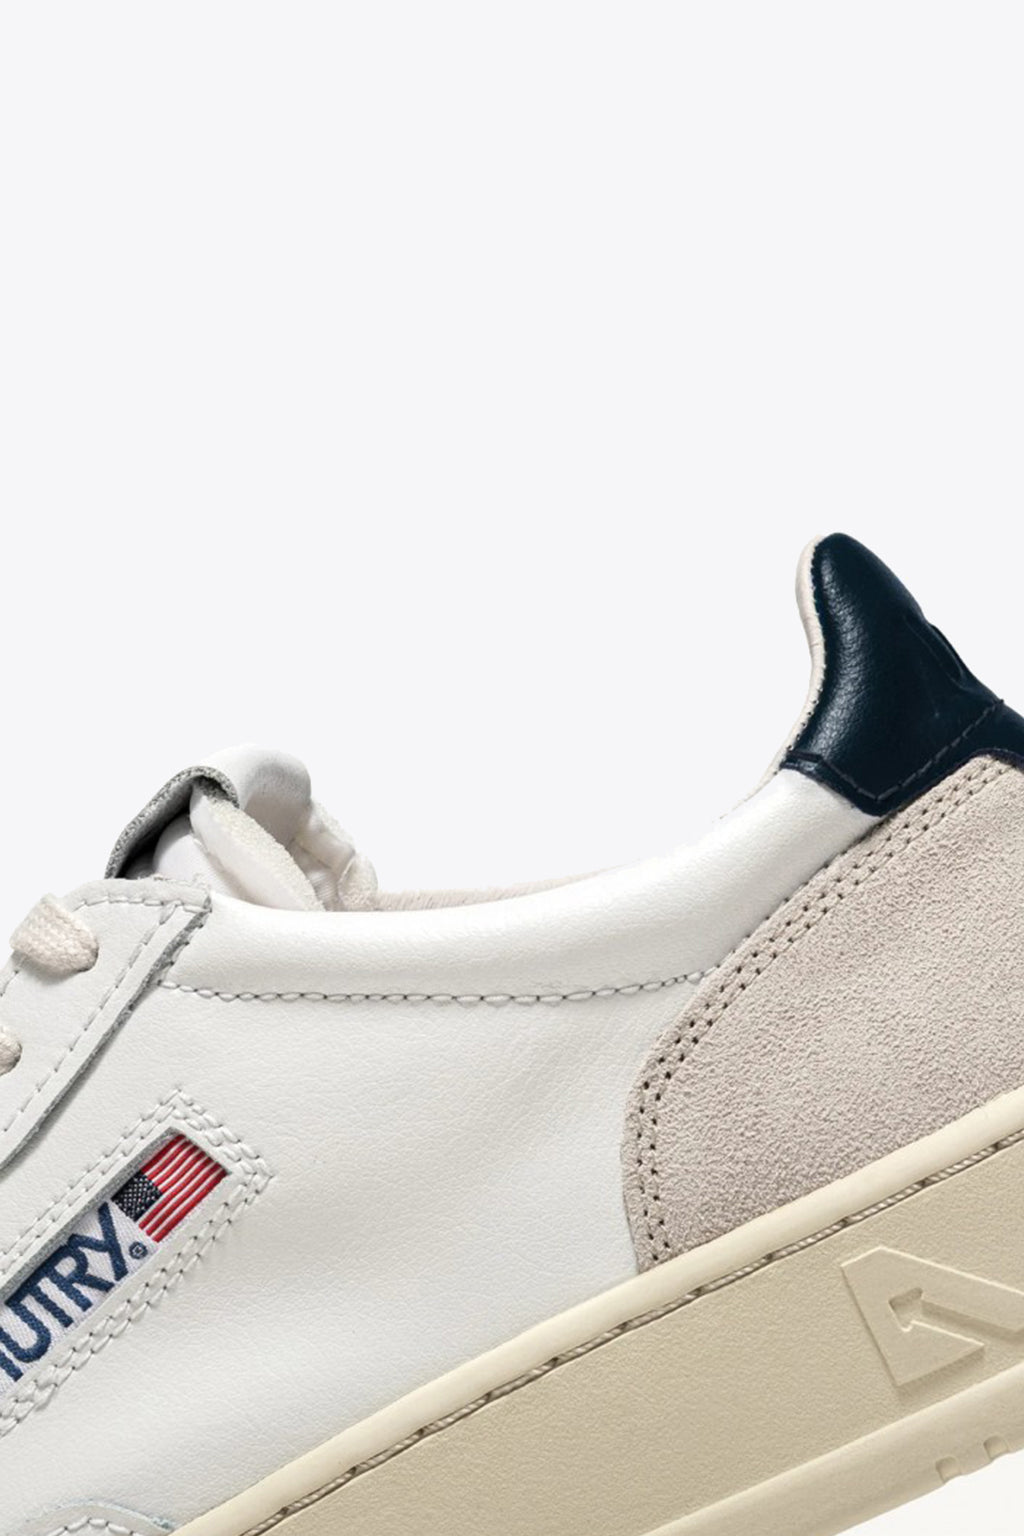 alt-image__White-leather-low-sneaker-with-blu-tab---Medalist